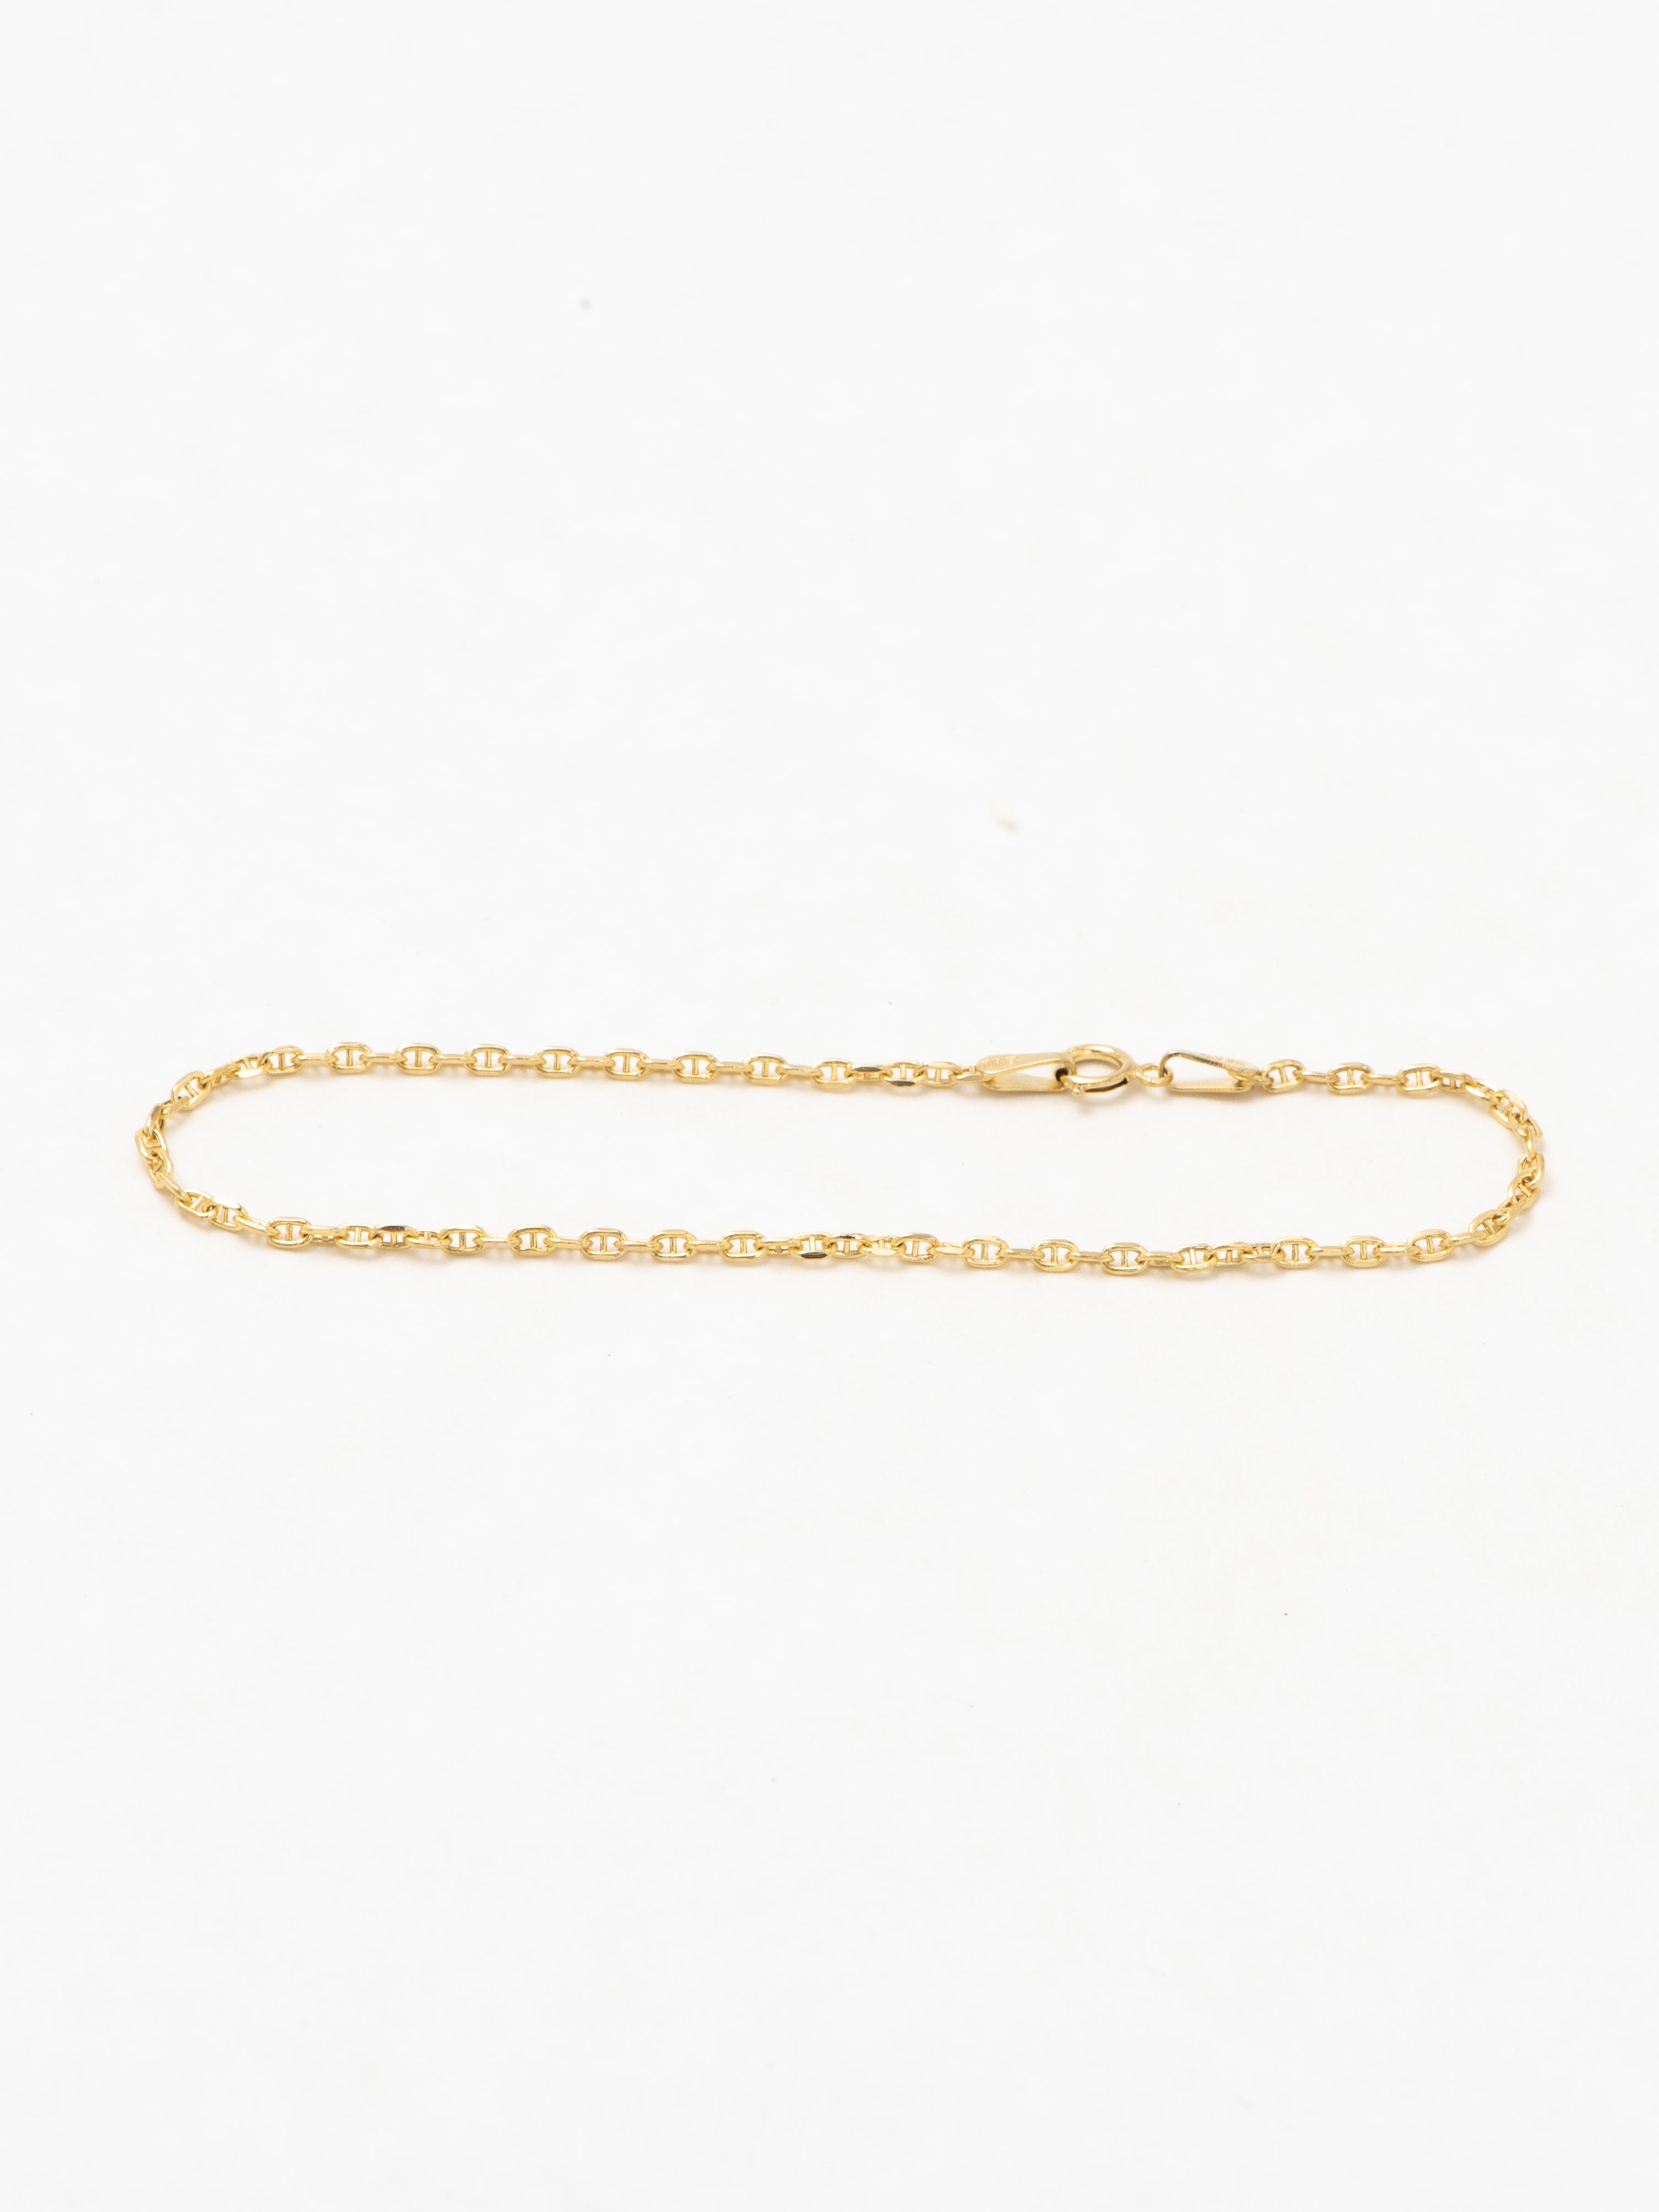 Stuller 1 mm Solid Diamond-Cut Cable Chain CH123:60019:P, Henry B. Ball  Jewelers